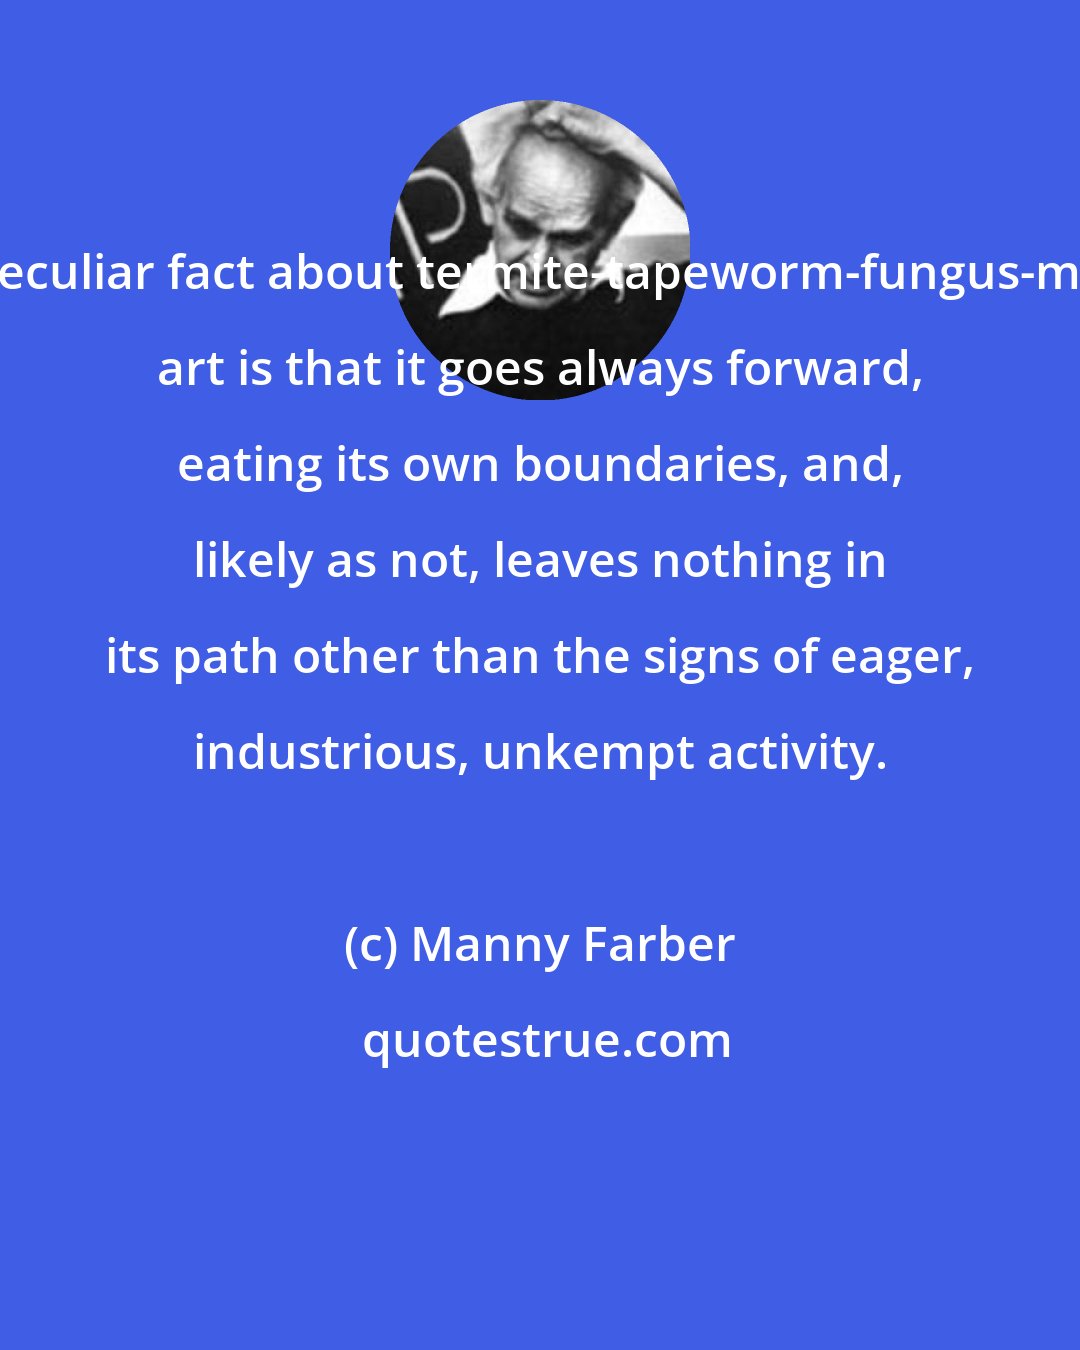 Manny Farber: A peculiar fact about termite-tapeworm-fungus-moss art is that it goes always forward, eating its own boundaries, and, likely as not, leaves nothing in its path other than the signs of eager, industrious, unkempt activity.